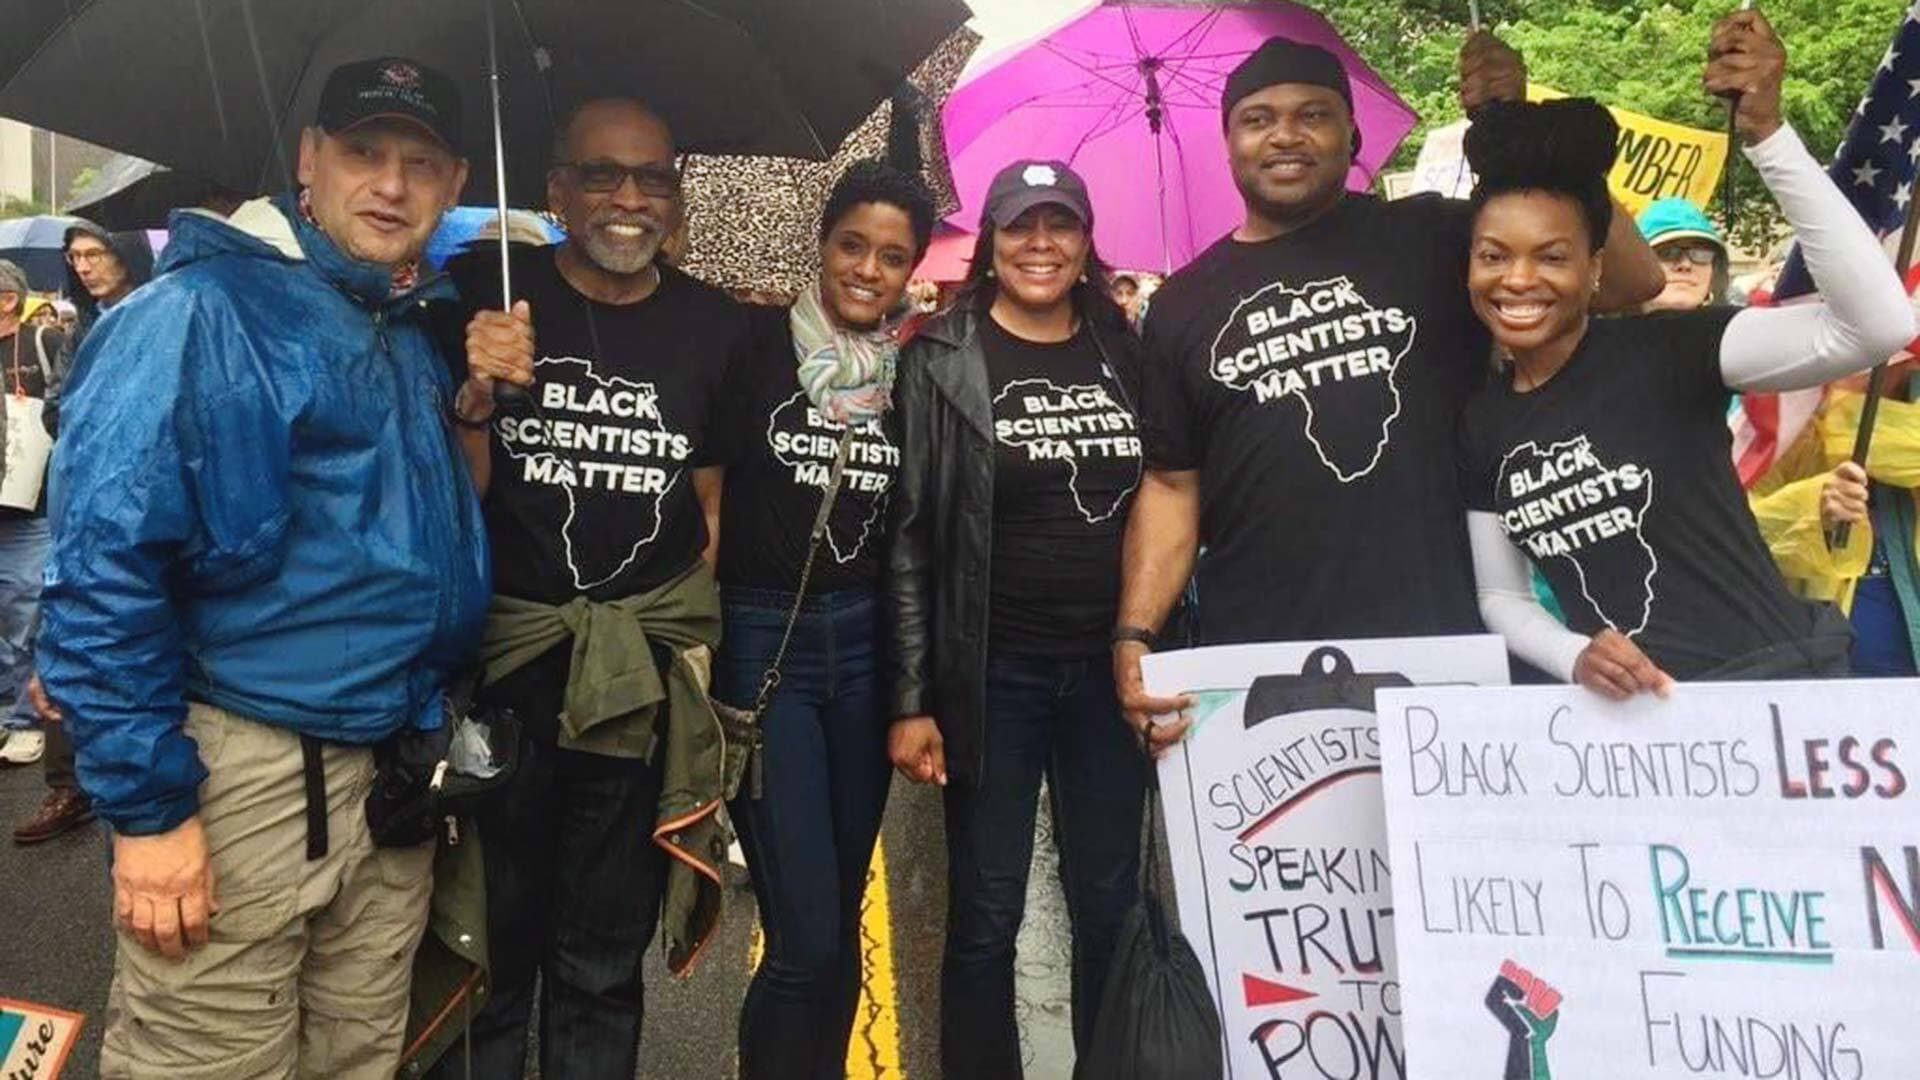 People wearing "Black Scientists Matter" shirts hold umbrellas